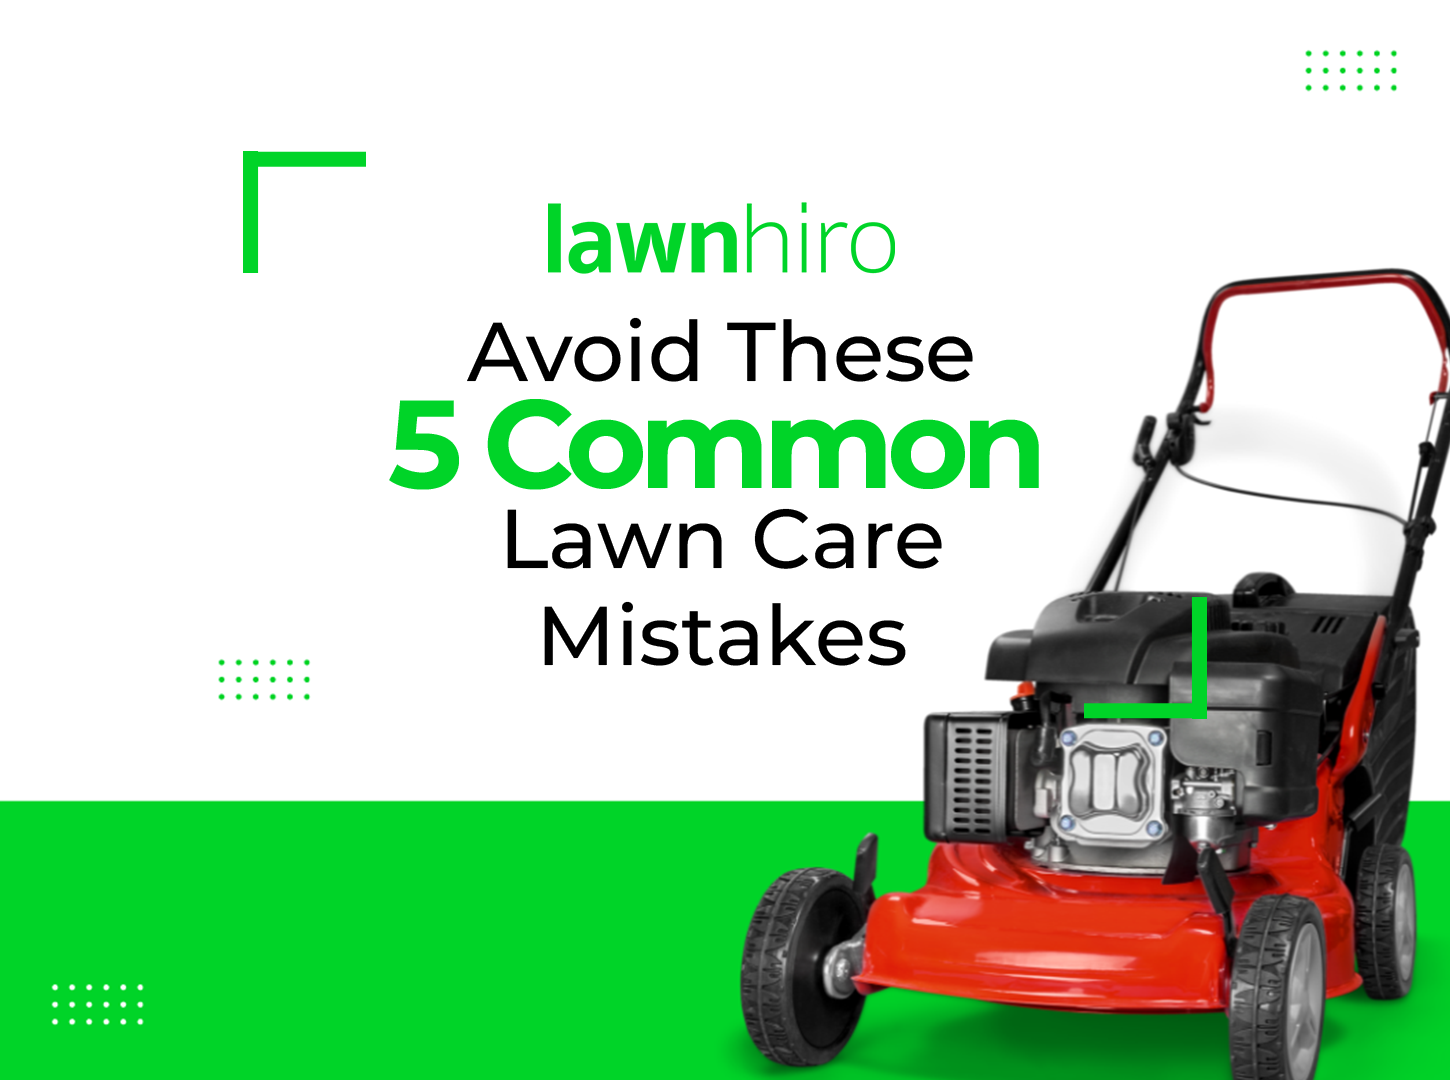 Featured image for “Avoid These 5 Common Lawn Care Mistakes: Tips and Tricks from Lawnhiro!”